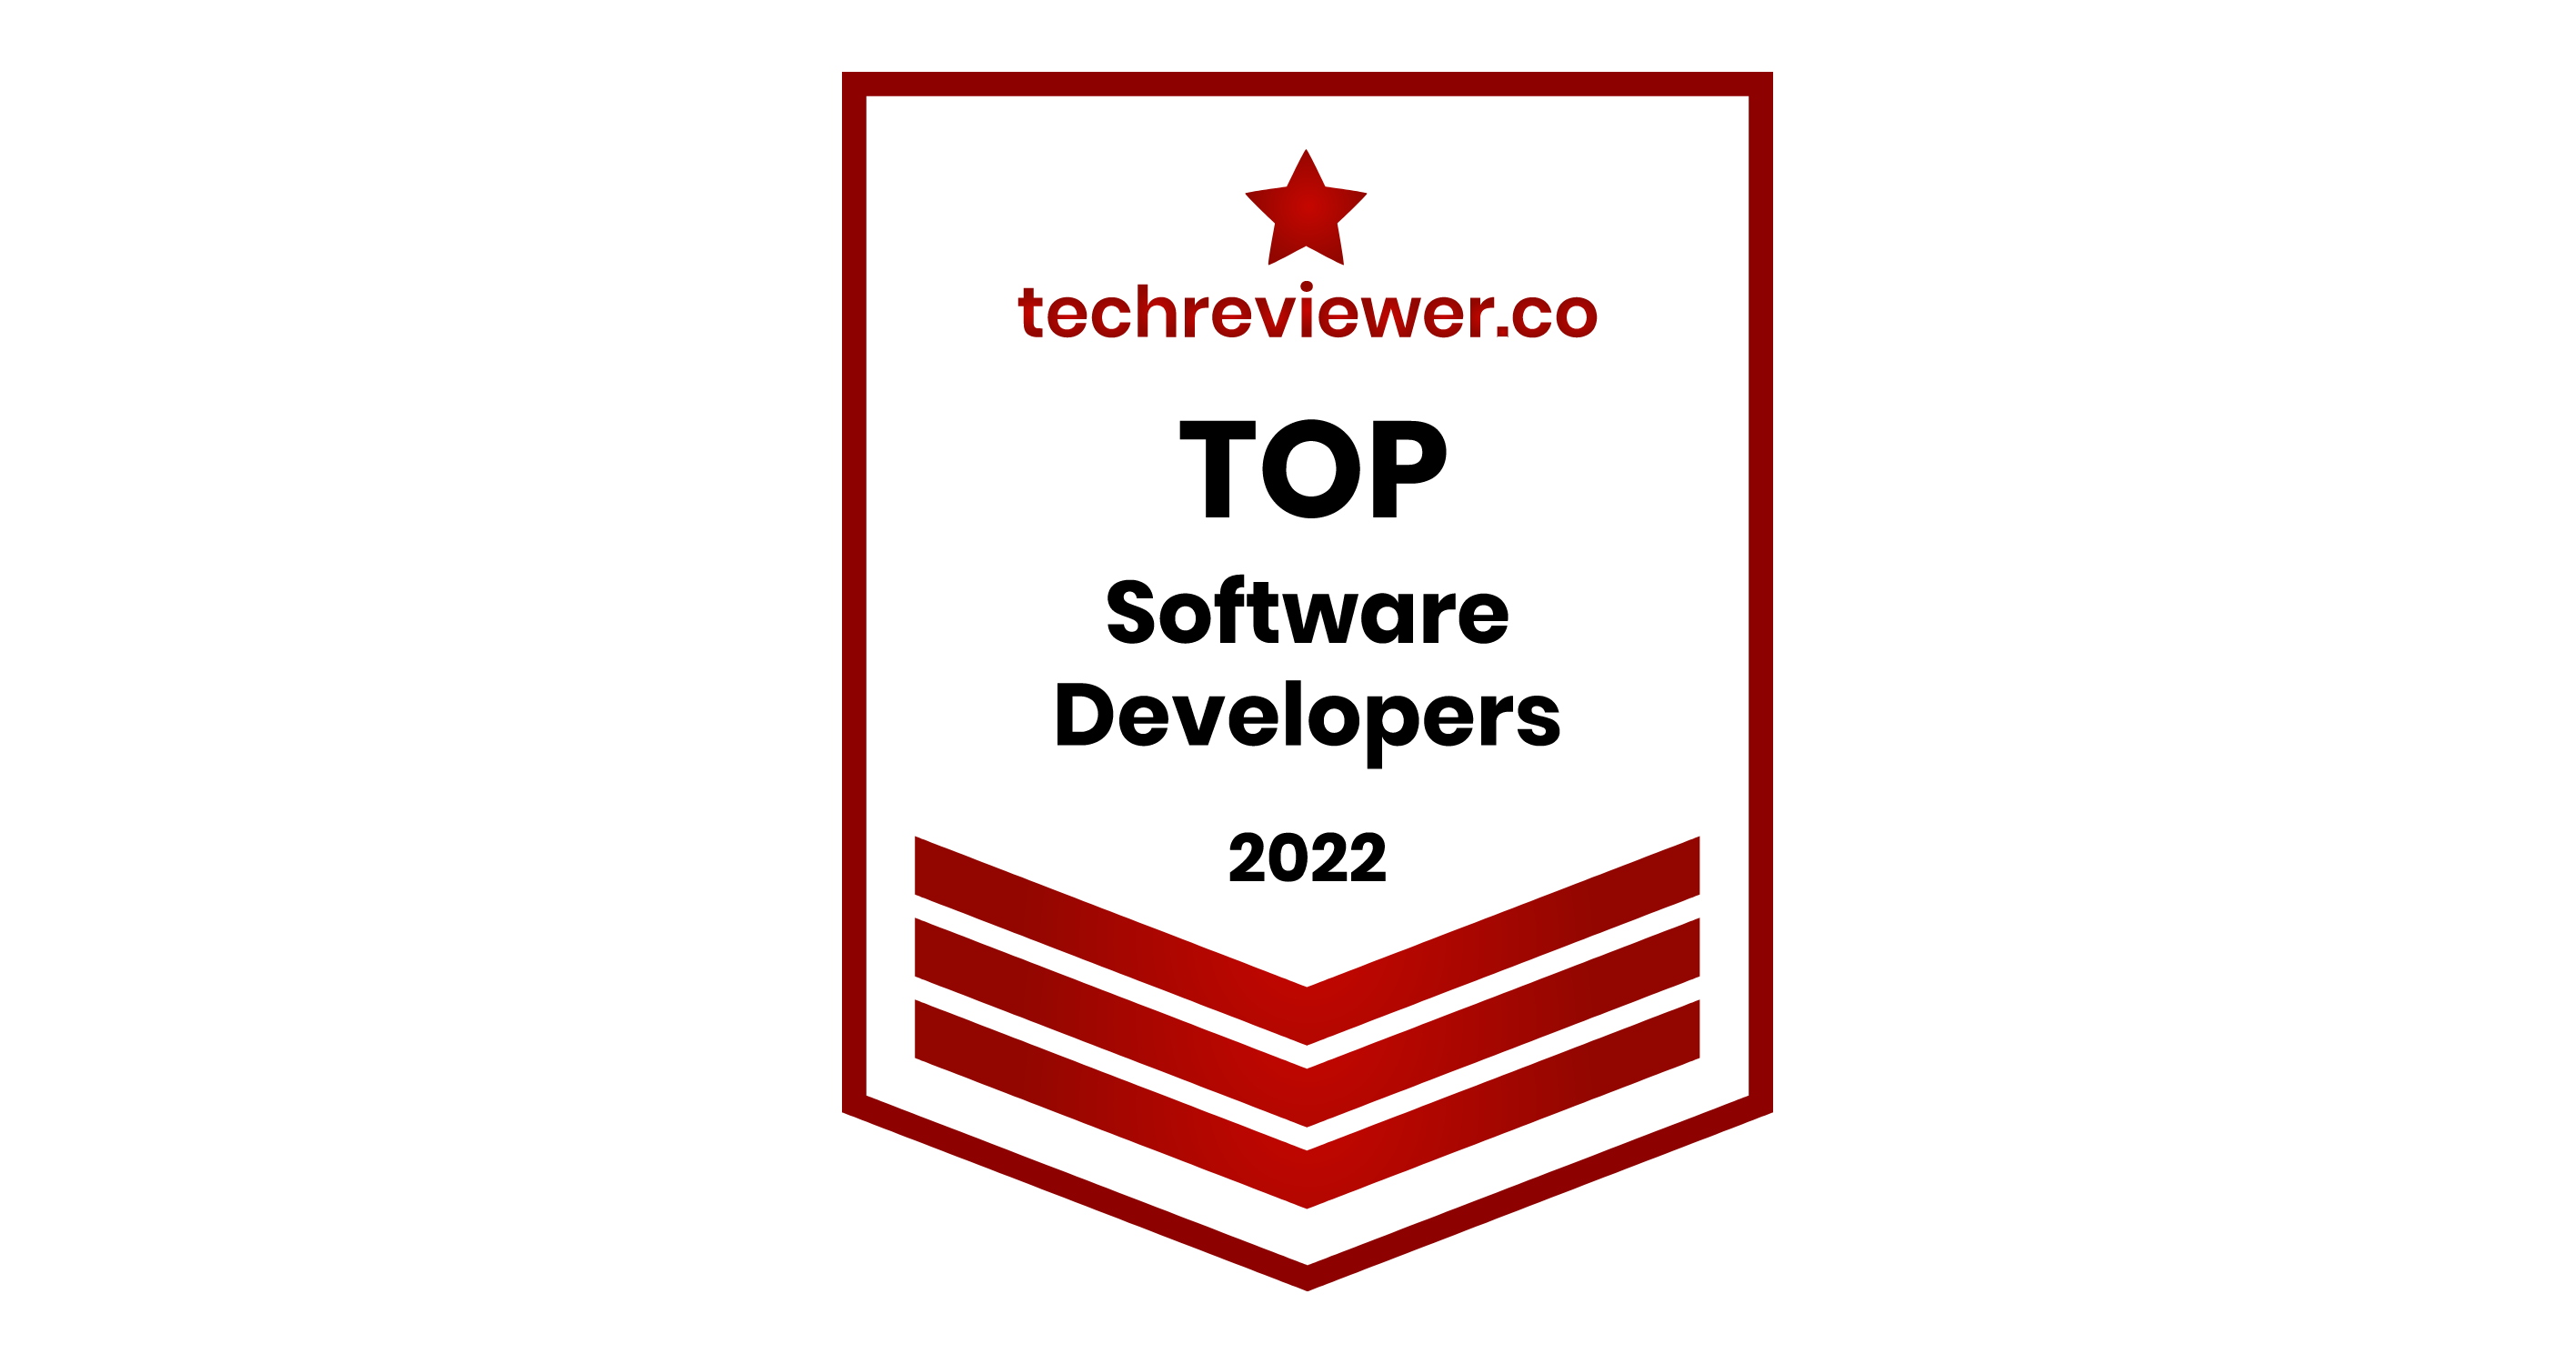 Dynamsoft Featured in Techreviewer's List of Top Software Development Companies for 2022